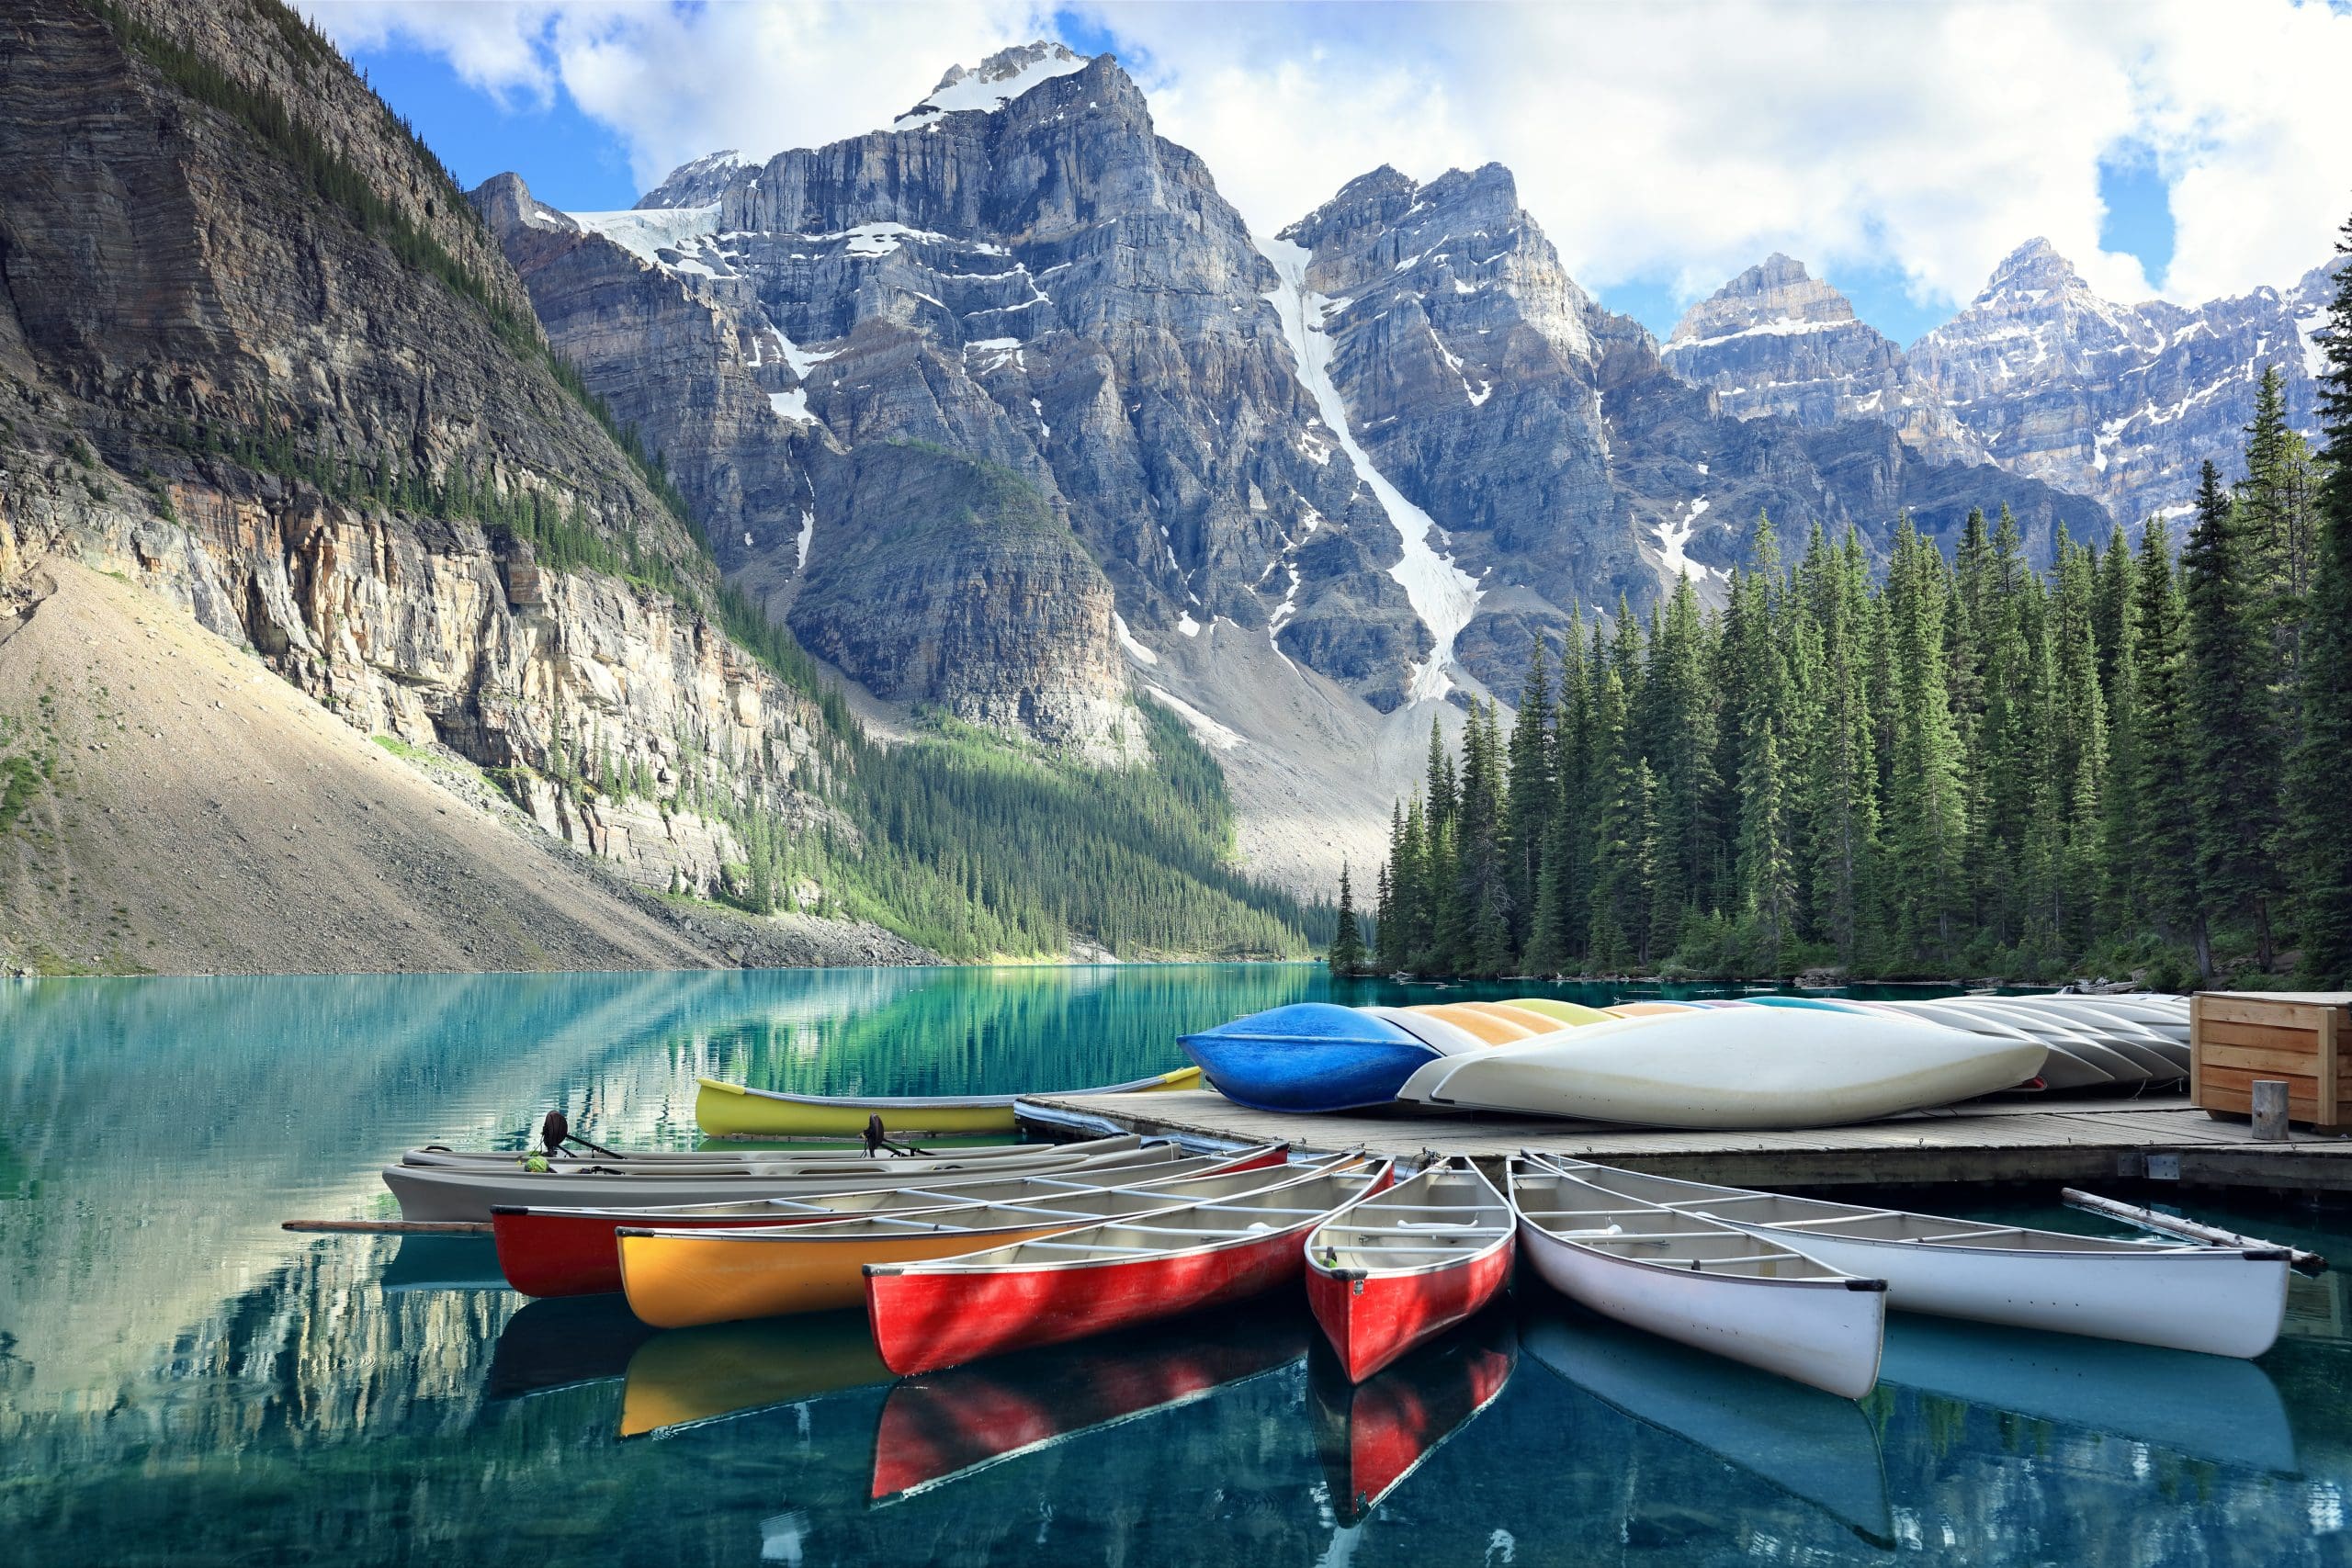 Top 10 things to do in banff